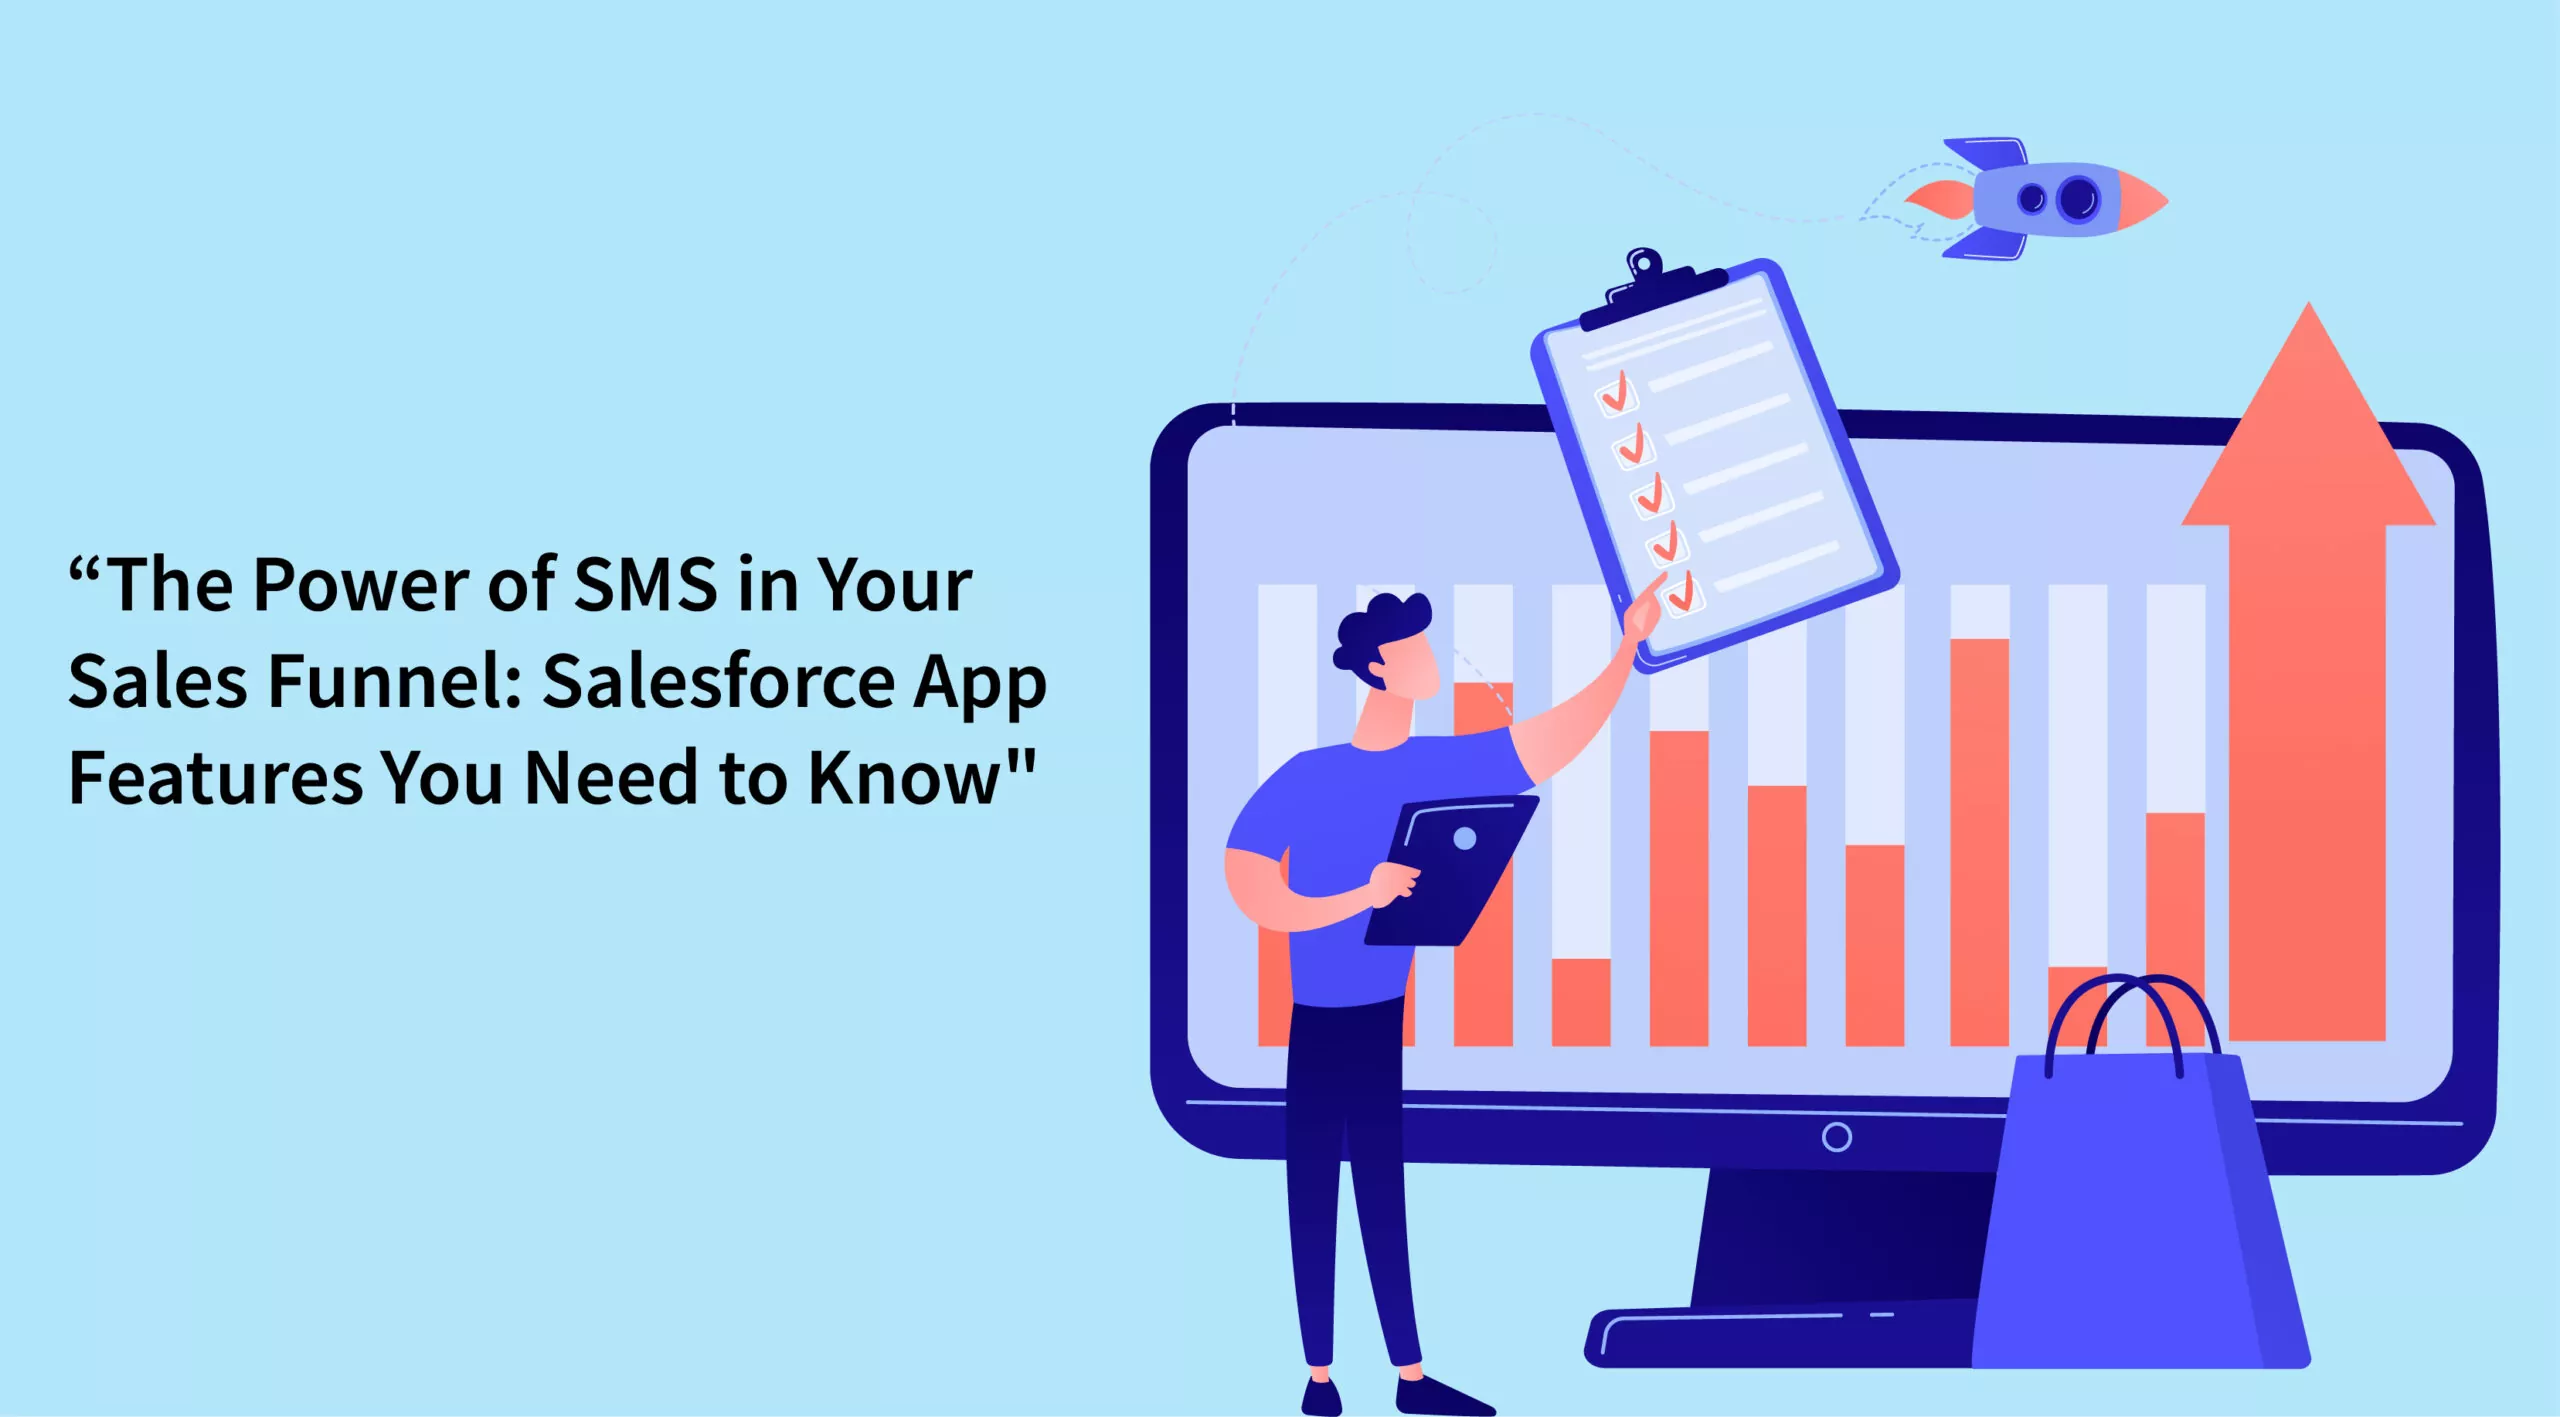 The Power of SMS in Your Sales Funnel: Salesforce App Features You Need to Know featured image